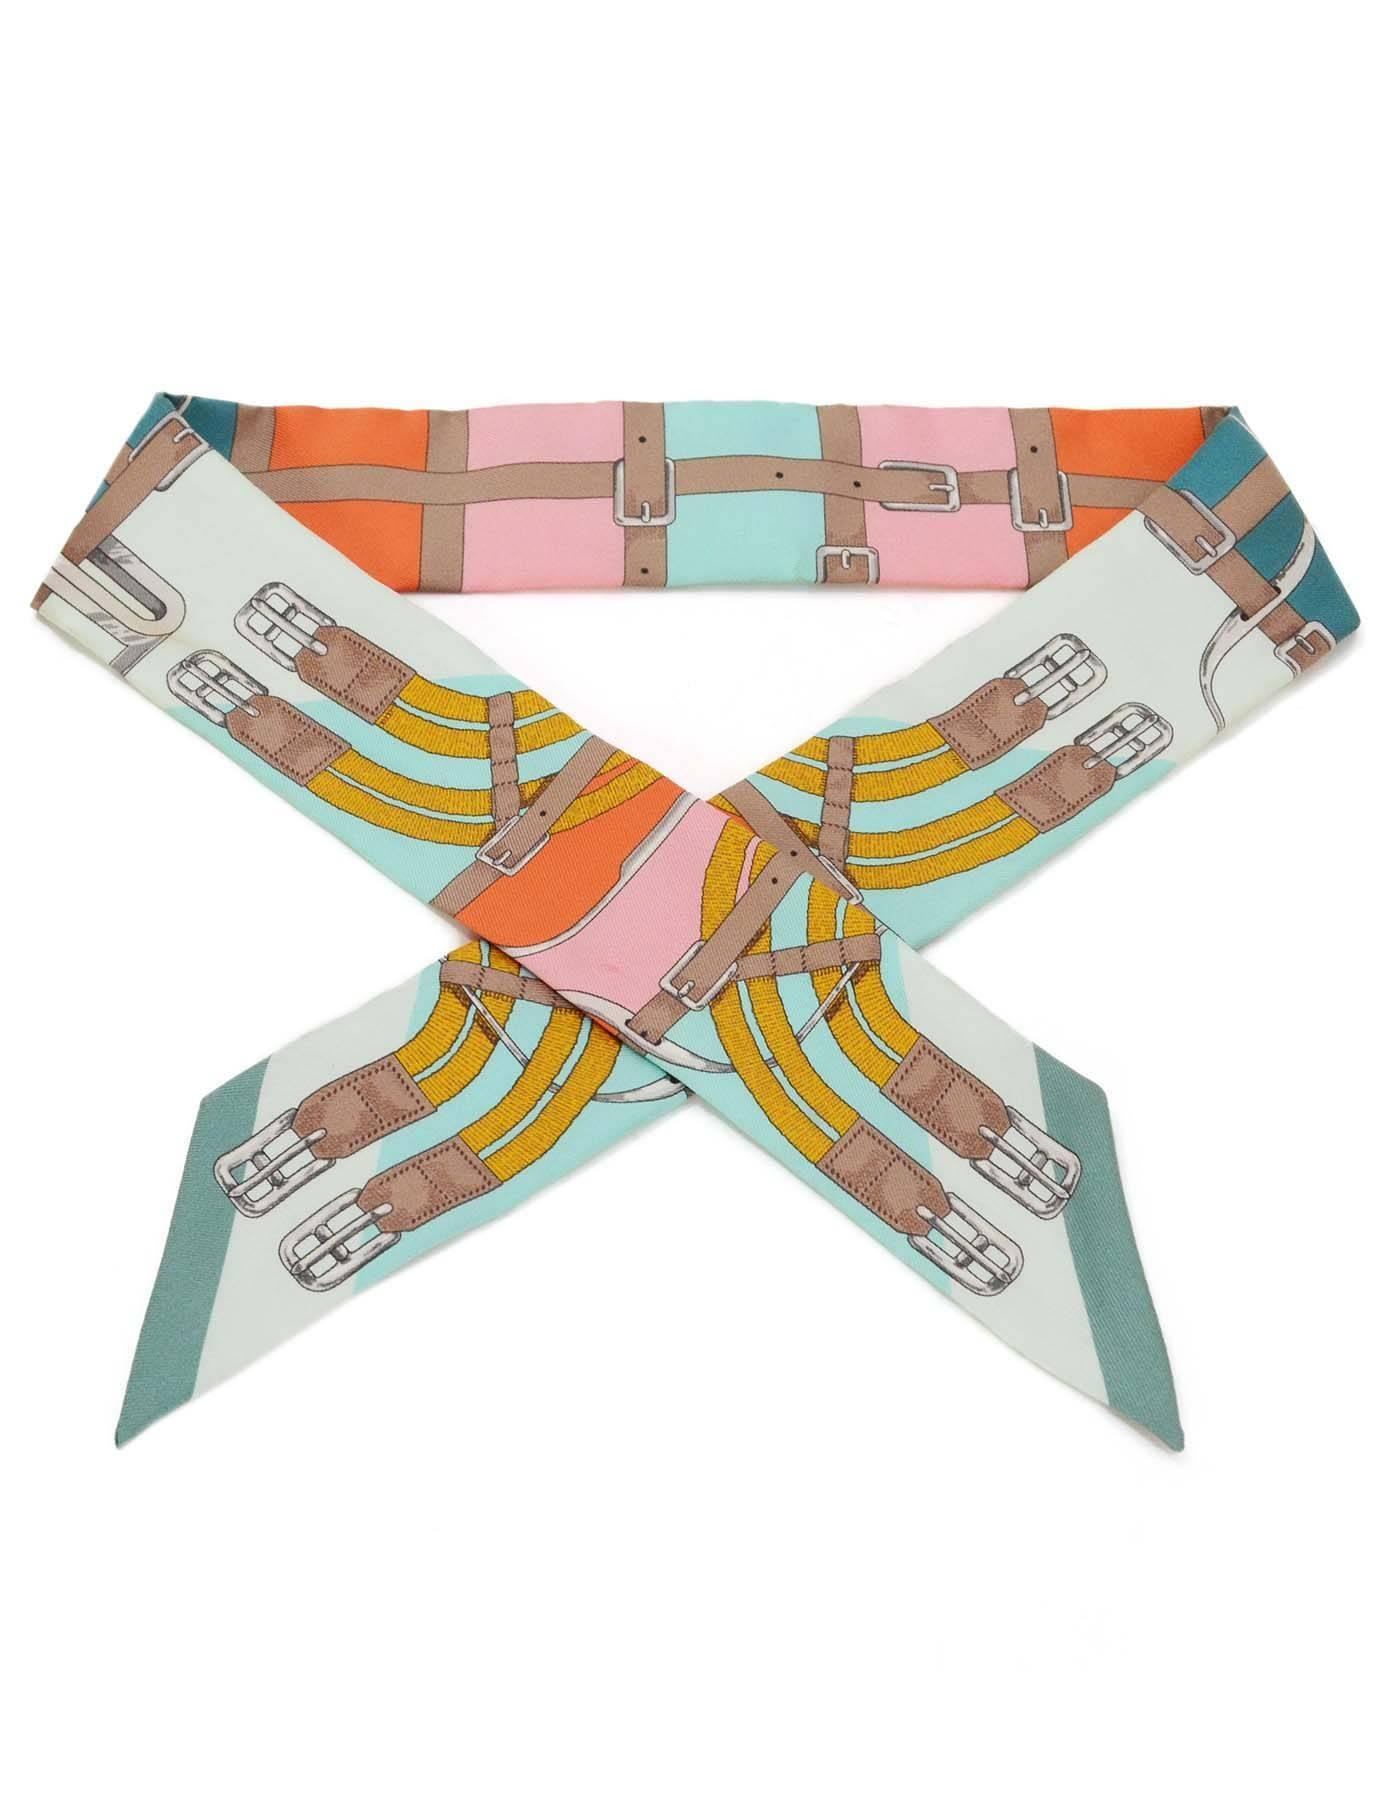 Hermes Pastel Silk Buckle Print Twilly Scarf
Features bucckle/belt print throughout

Made In: France
Color: Pastel multi-color
Composition: 100% Silk
Retail Price: $160 + tax
Overall Condition: Very good pre-owned condition with the exception